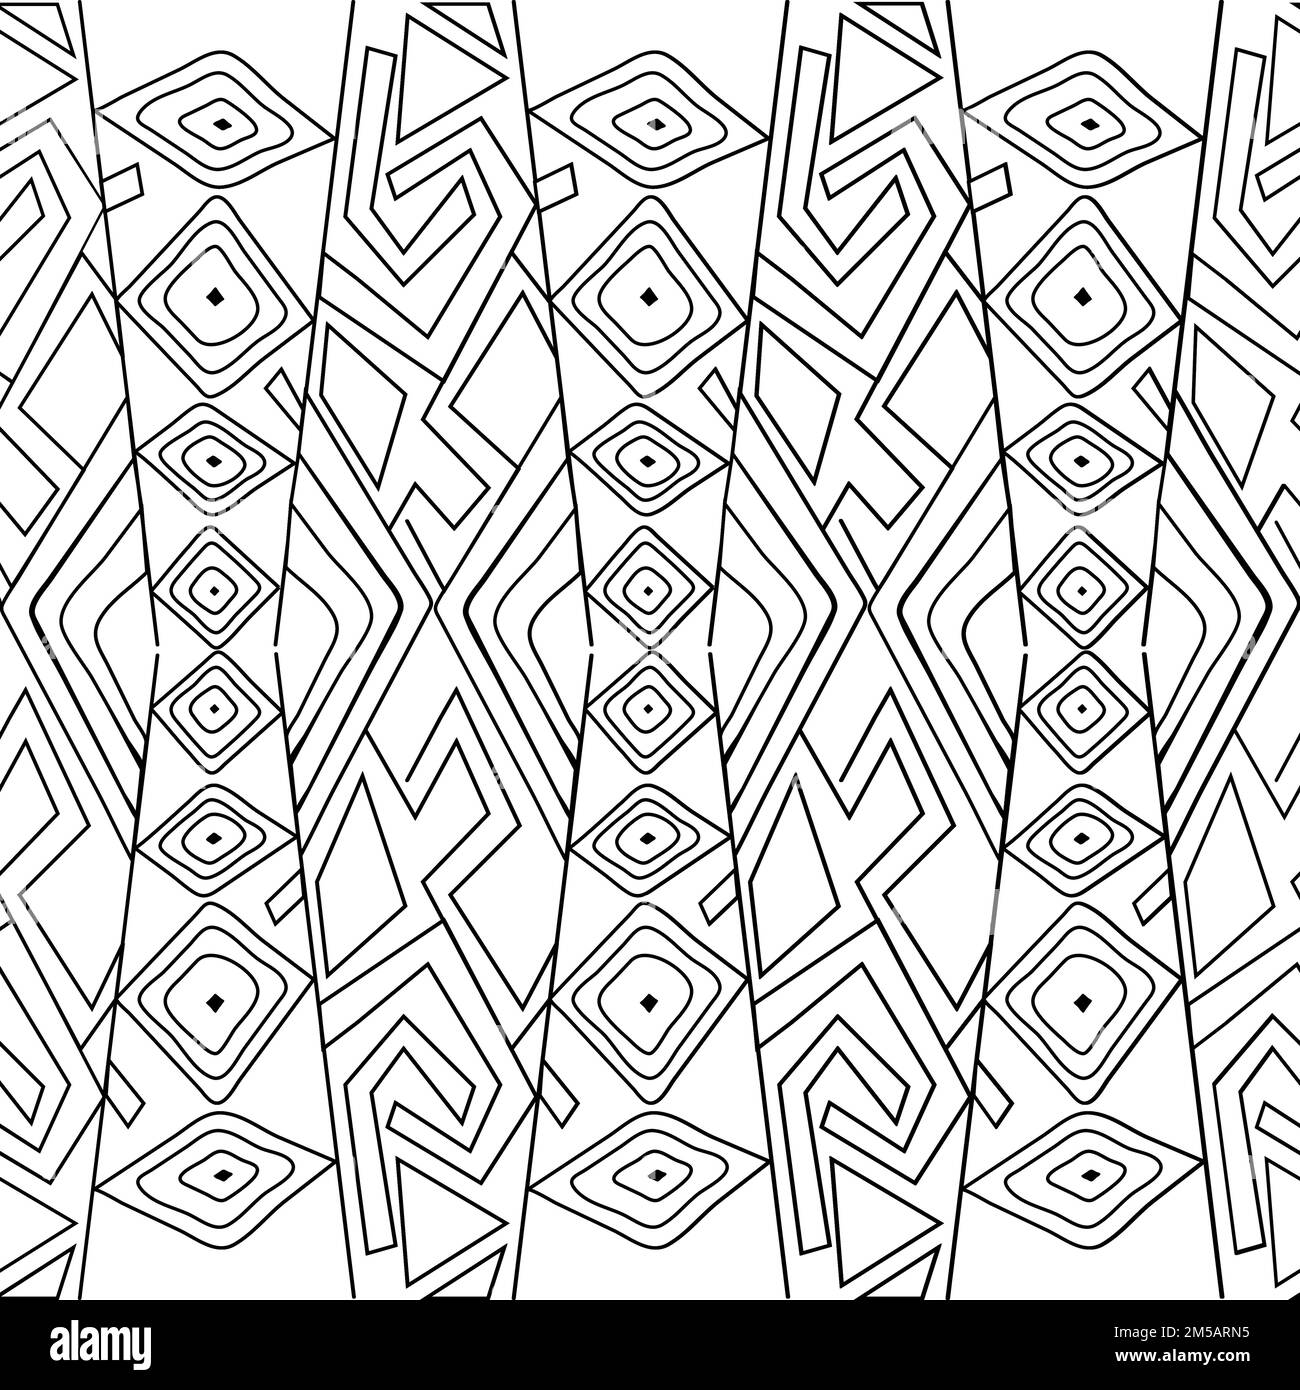 Ethnic geometric black and white seamless endless pattern; awesome pattern for prints; geometric abstract shapes on white background; Stock Vector